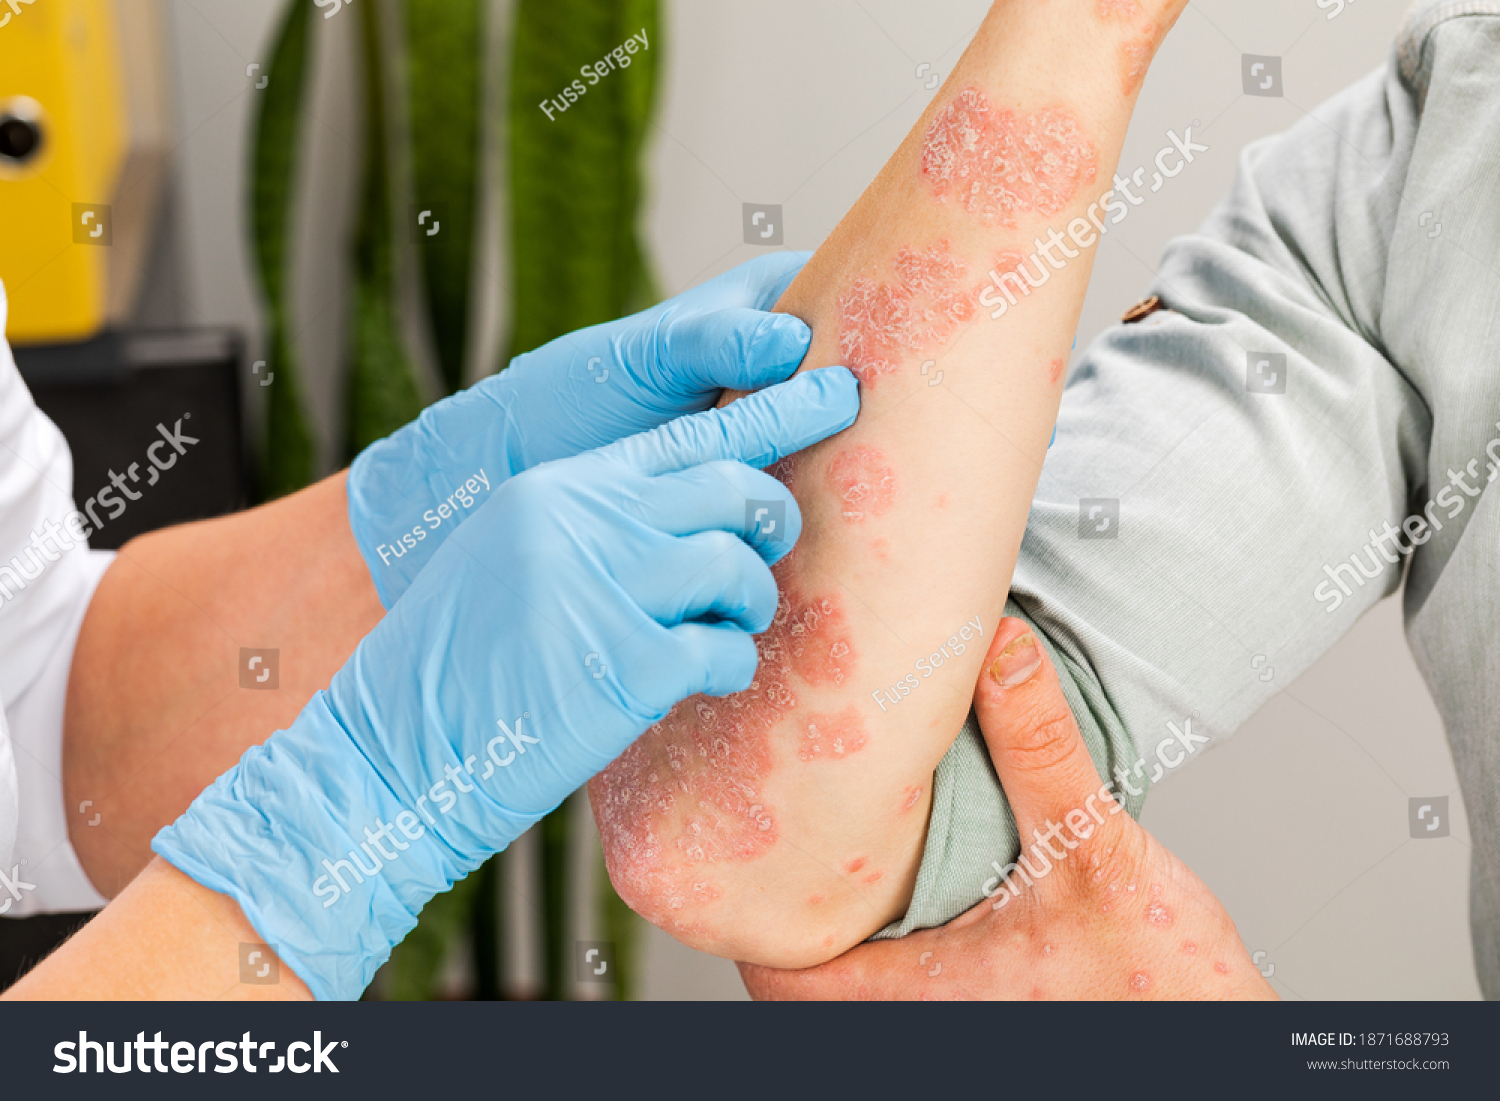 A dermatologist wearing gloves examines the skin of a sick patient. Examination and diagnosis of skin diseases-allergies, psoriasis, eczema, dermatitis. #1871688793